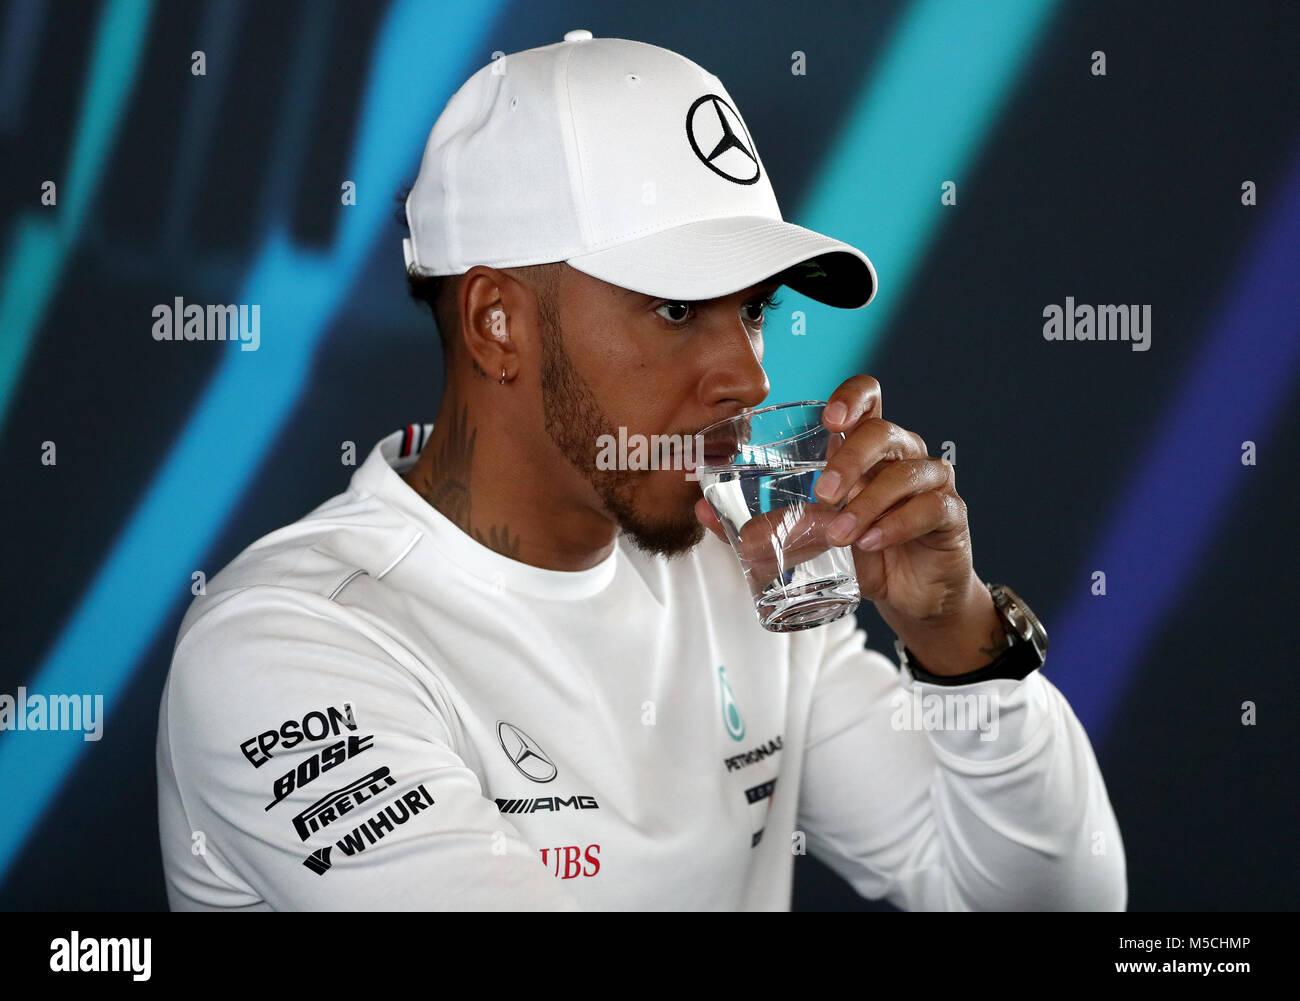 Mercedes driver Lewis Hamilton attending a press conference during the Mercedes-AMG F1 2018 car launch at Silverstone, Towcester. Stock Photo